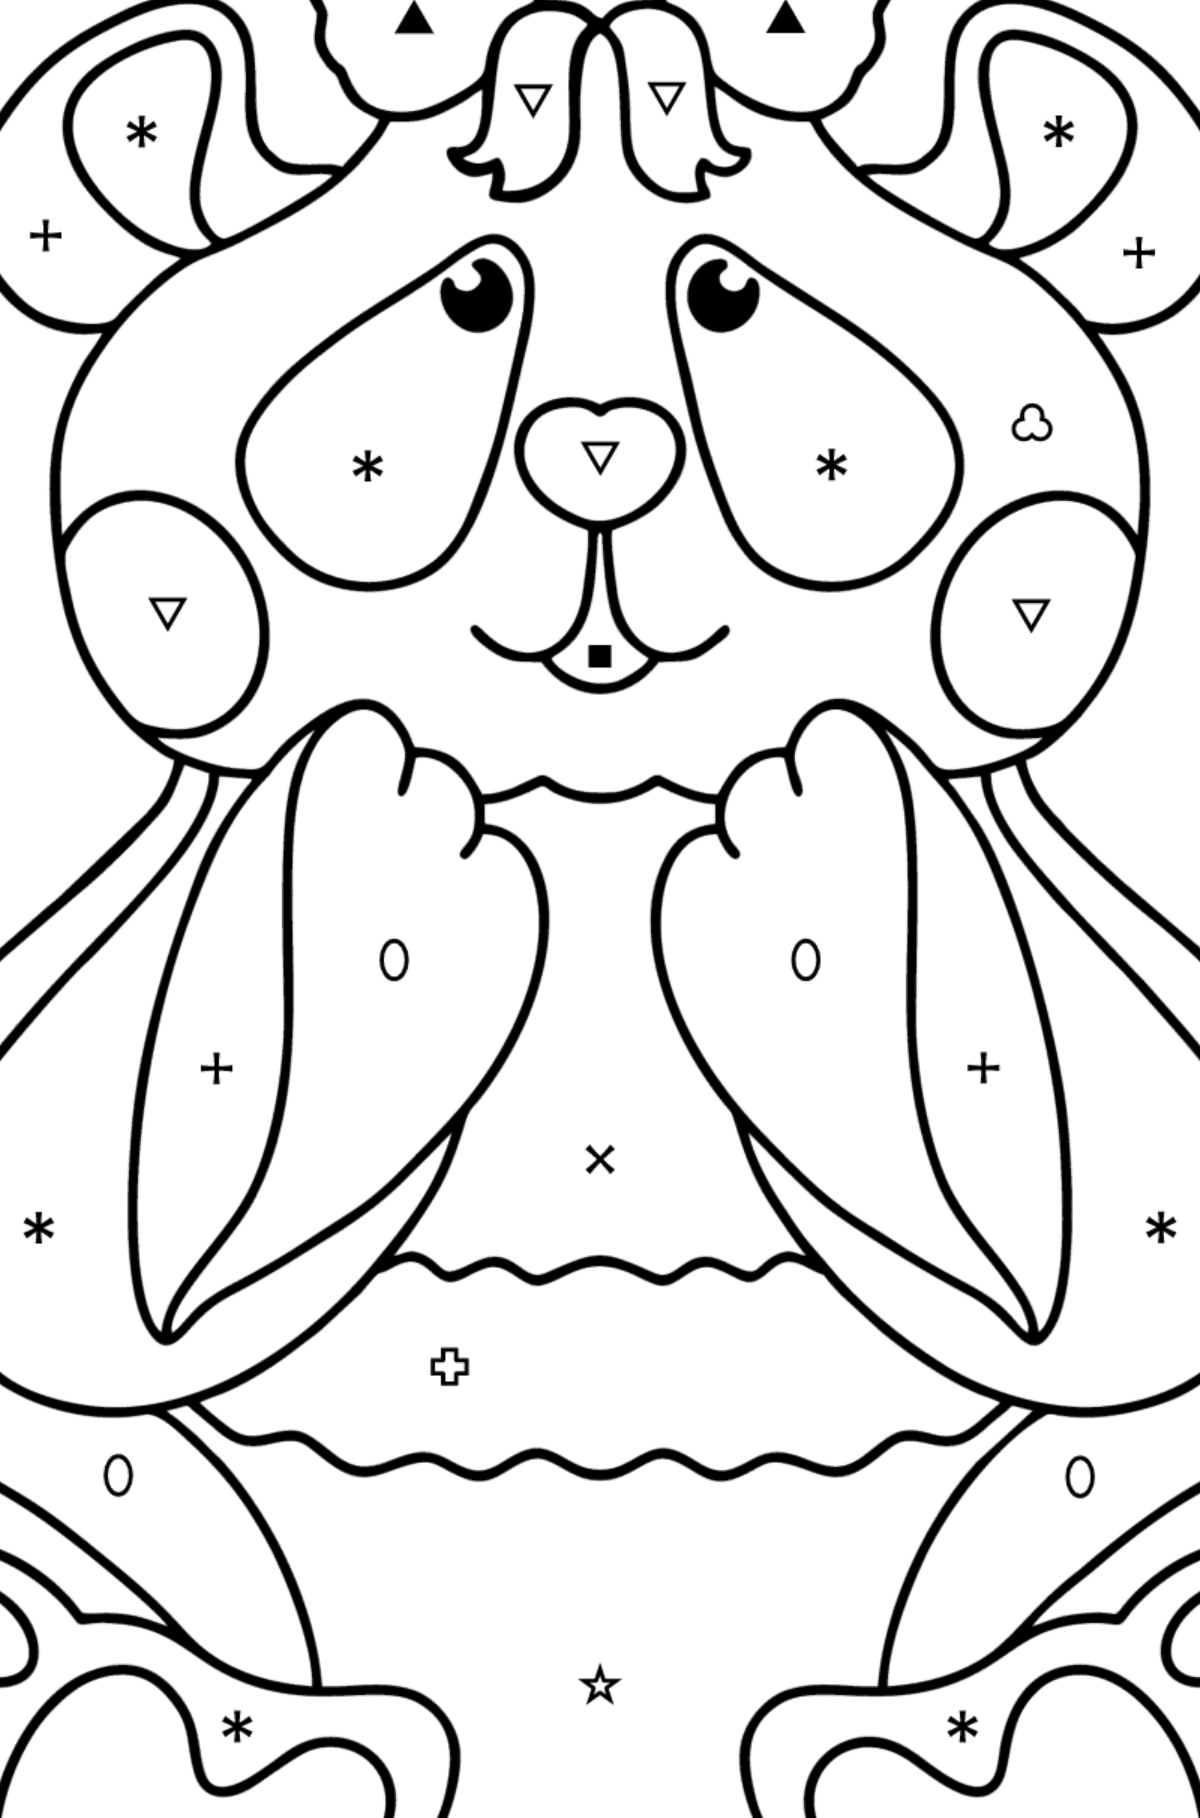 Panda baby coloring page - Coloring by Symbols and Geometric Shapes for Kids